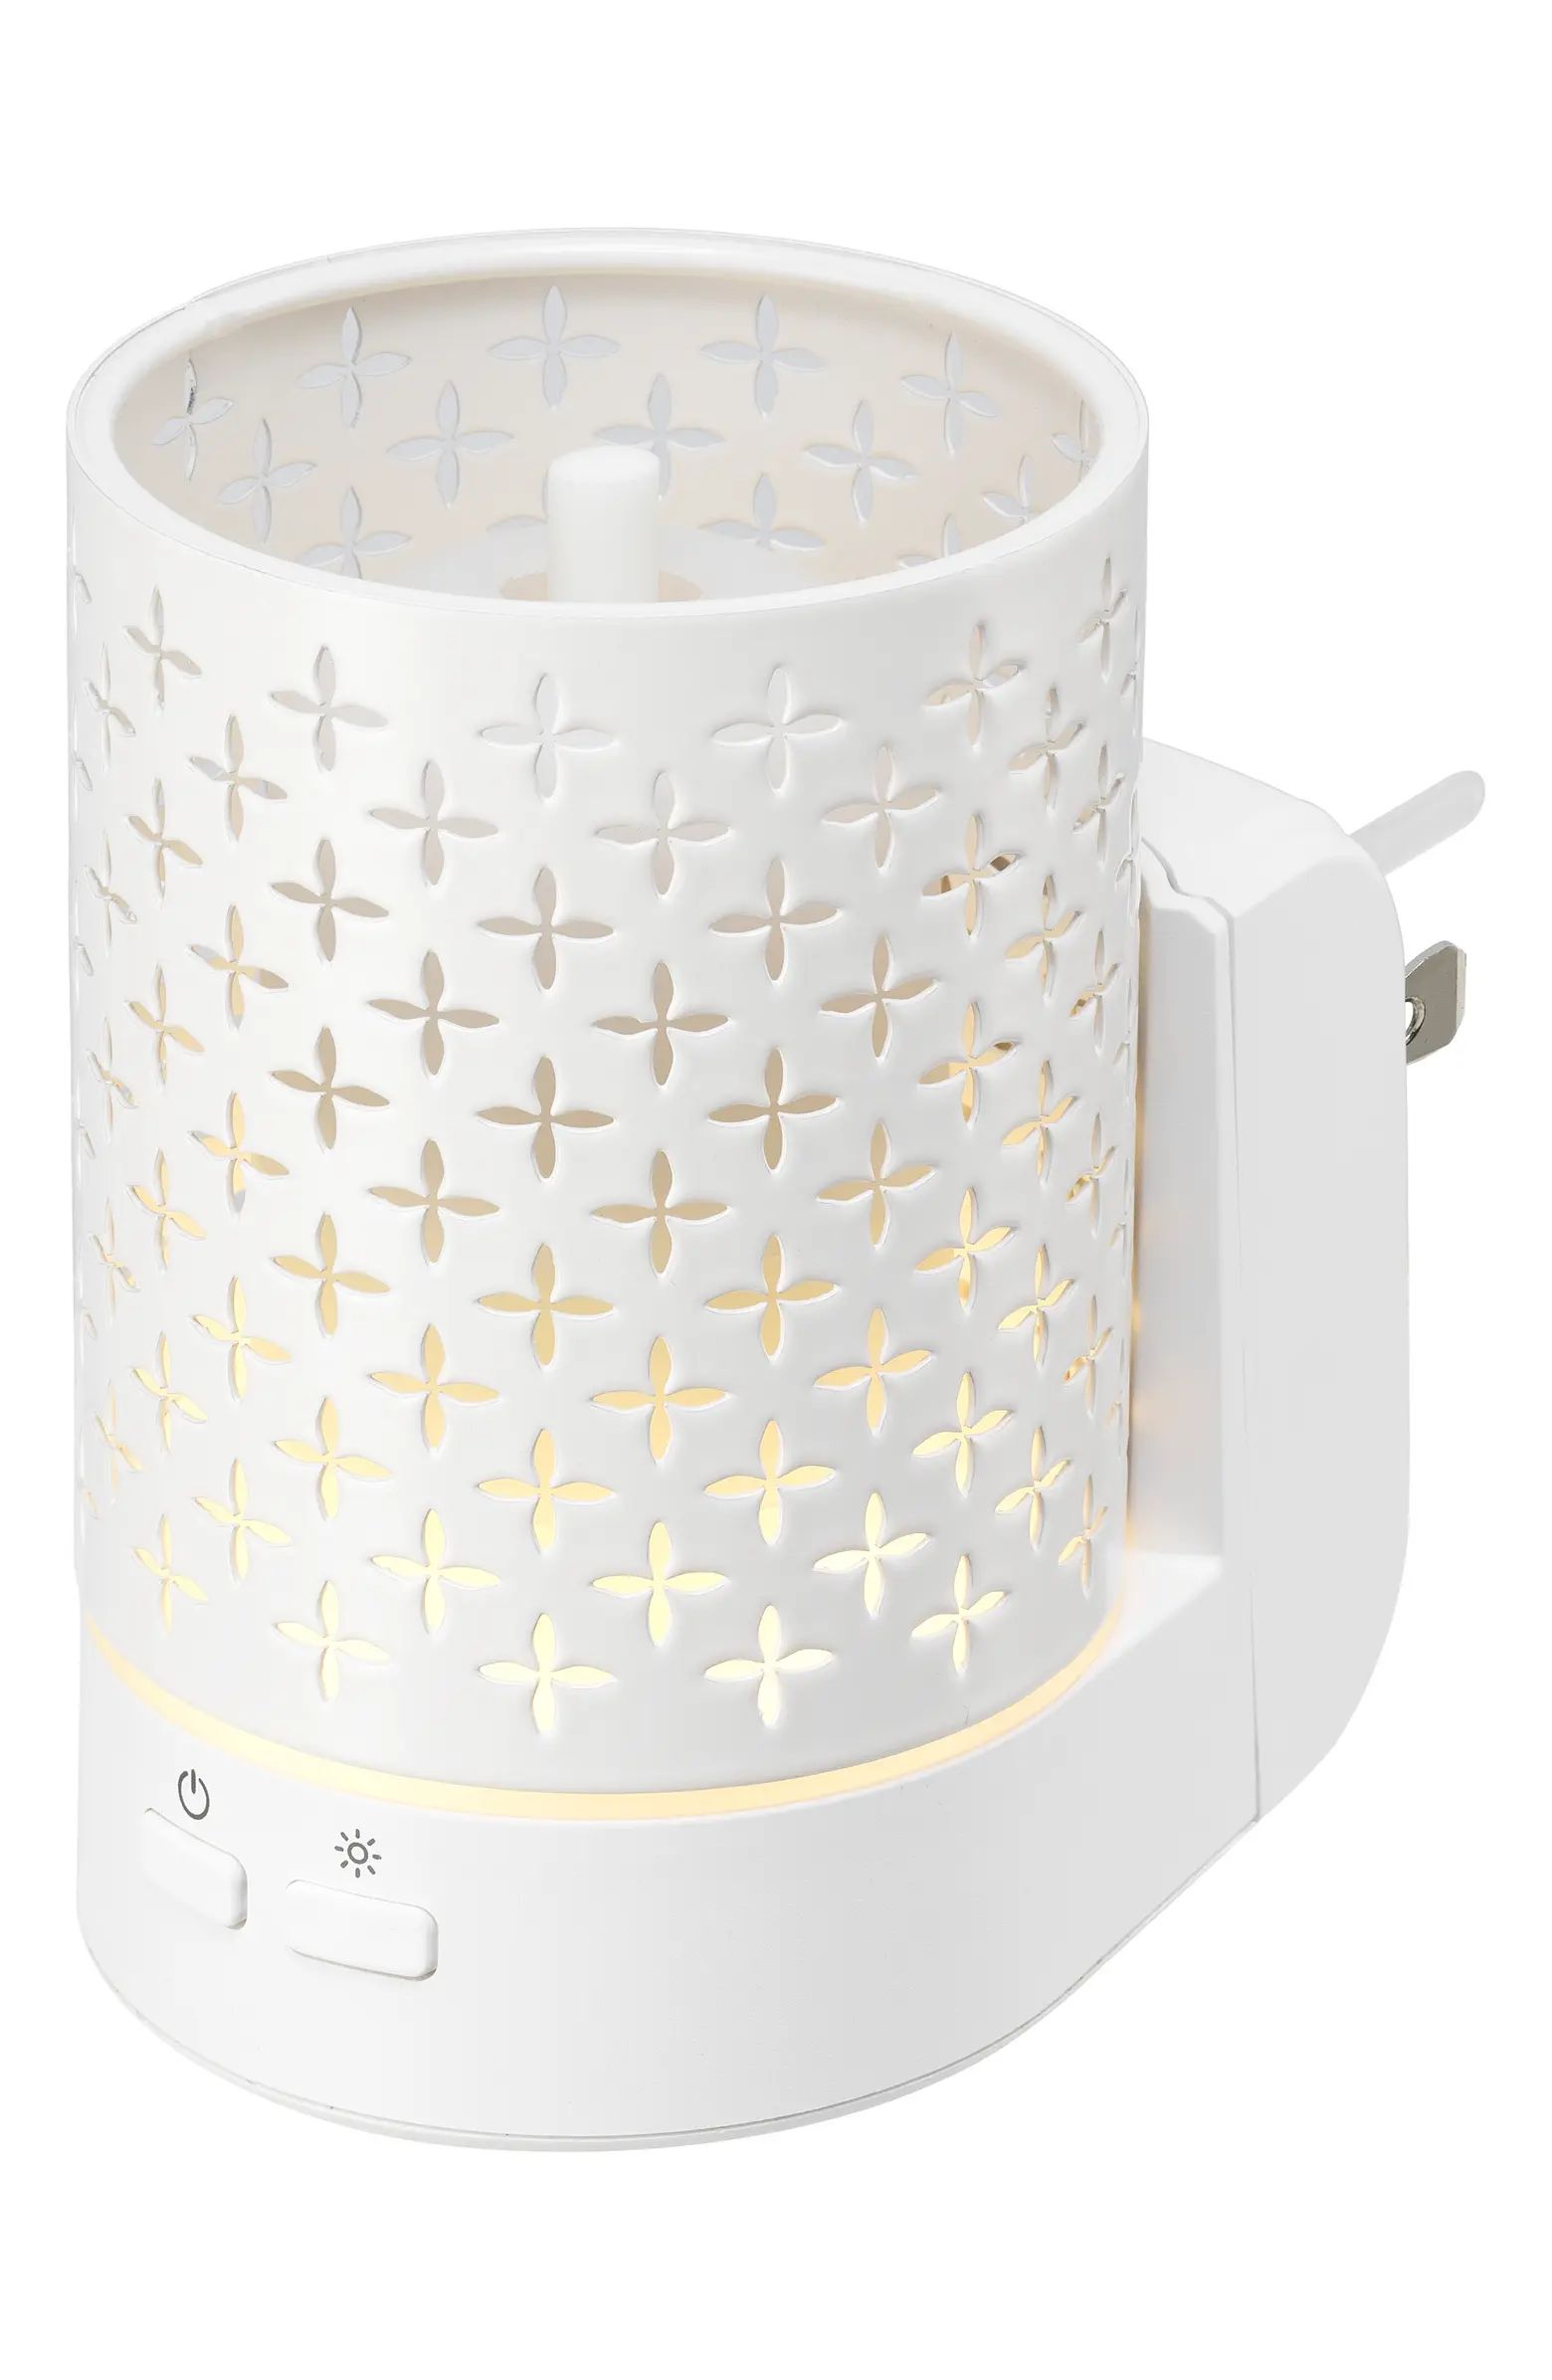 Twilight Wall Aromatherapy Diffuser | Nordstrom